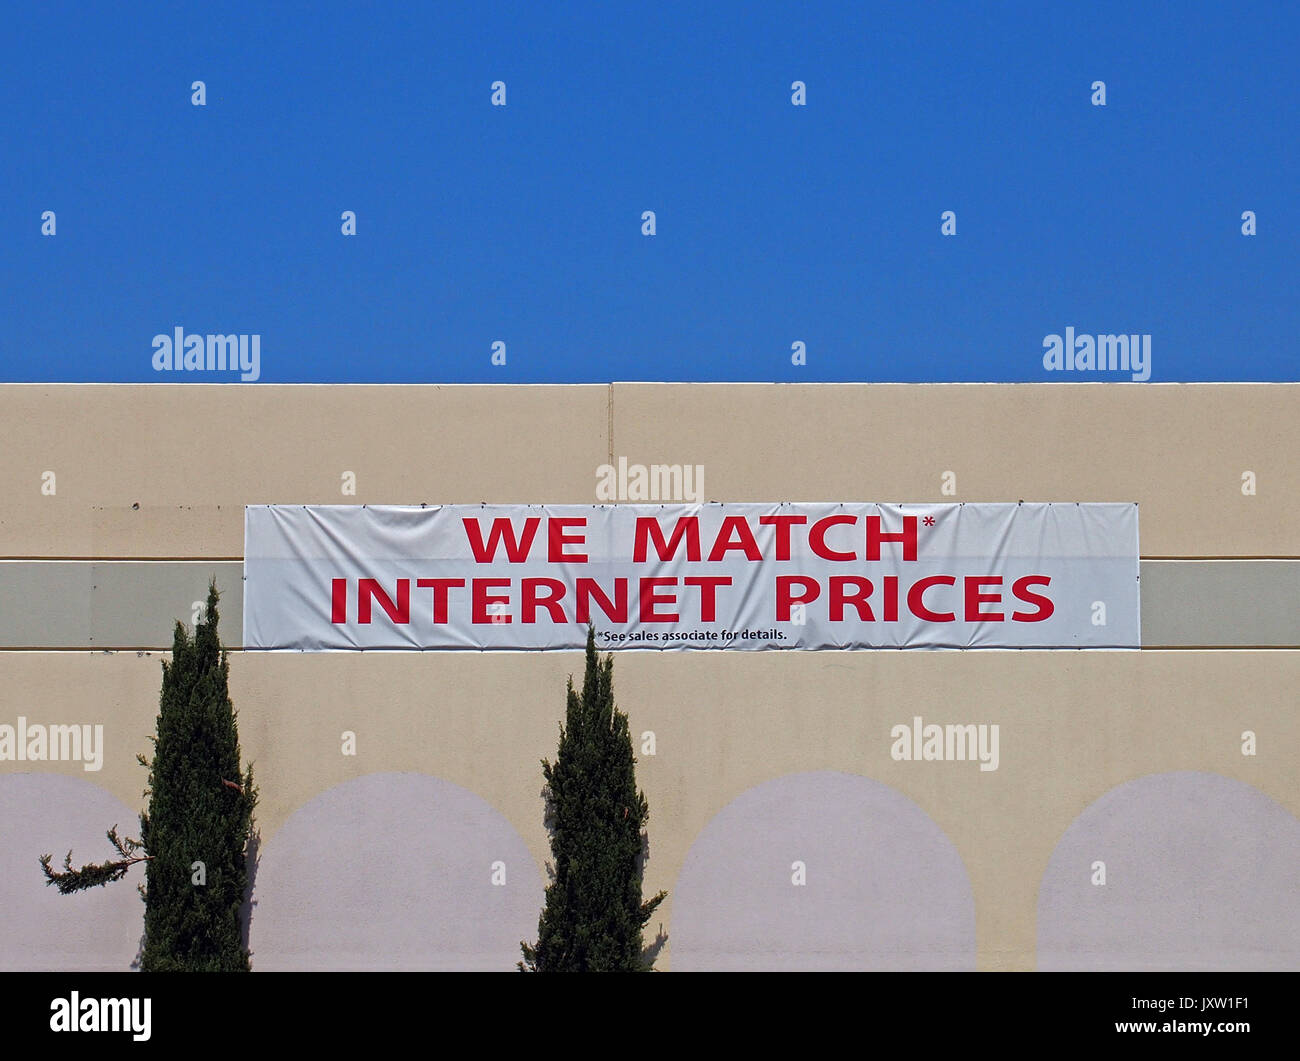 We Match Internet Prices sign at Fry's Electronics store, Fremont, California, Stock Photo